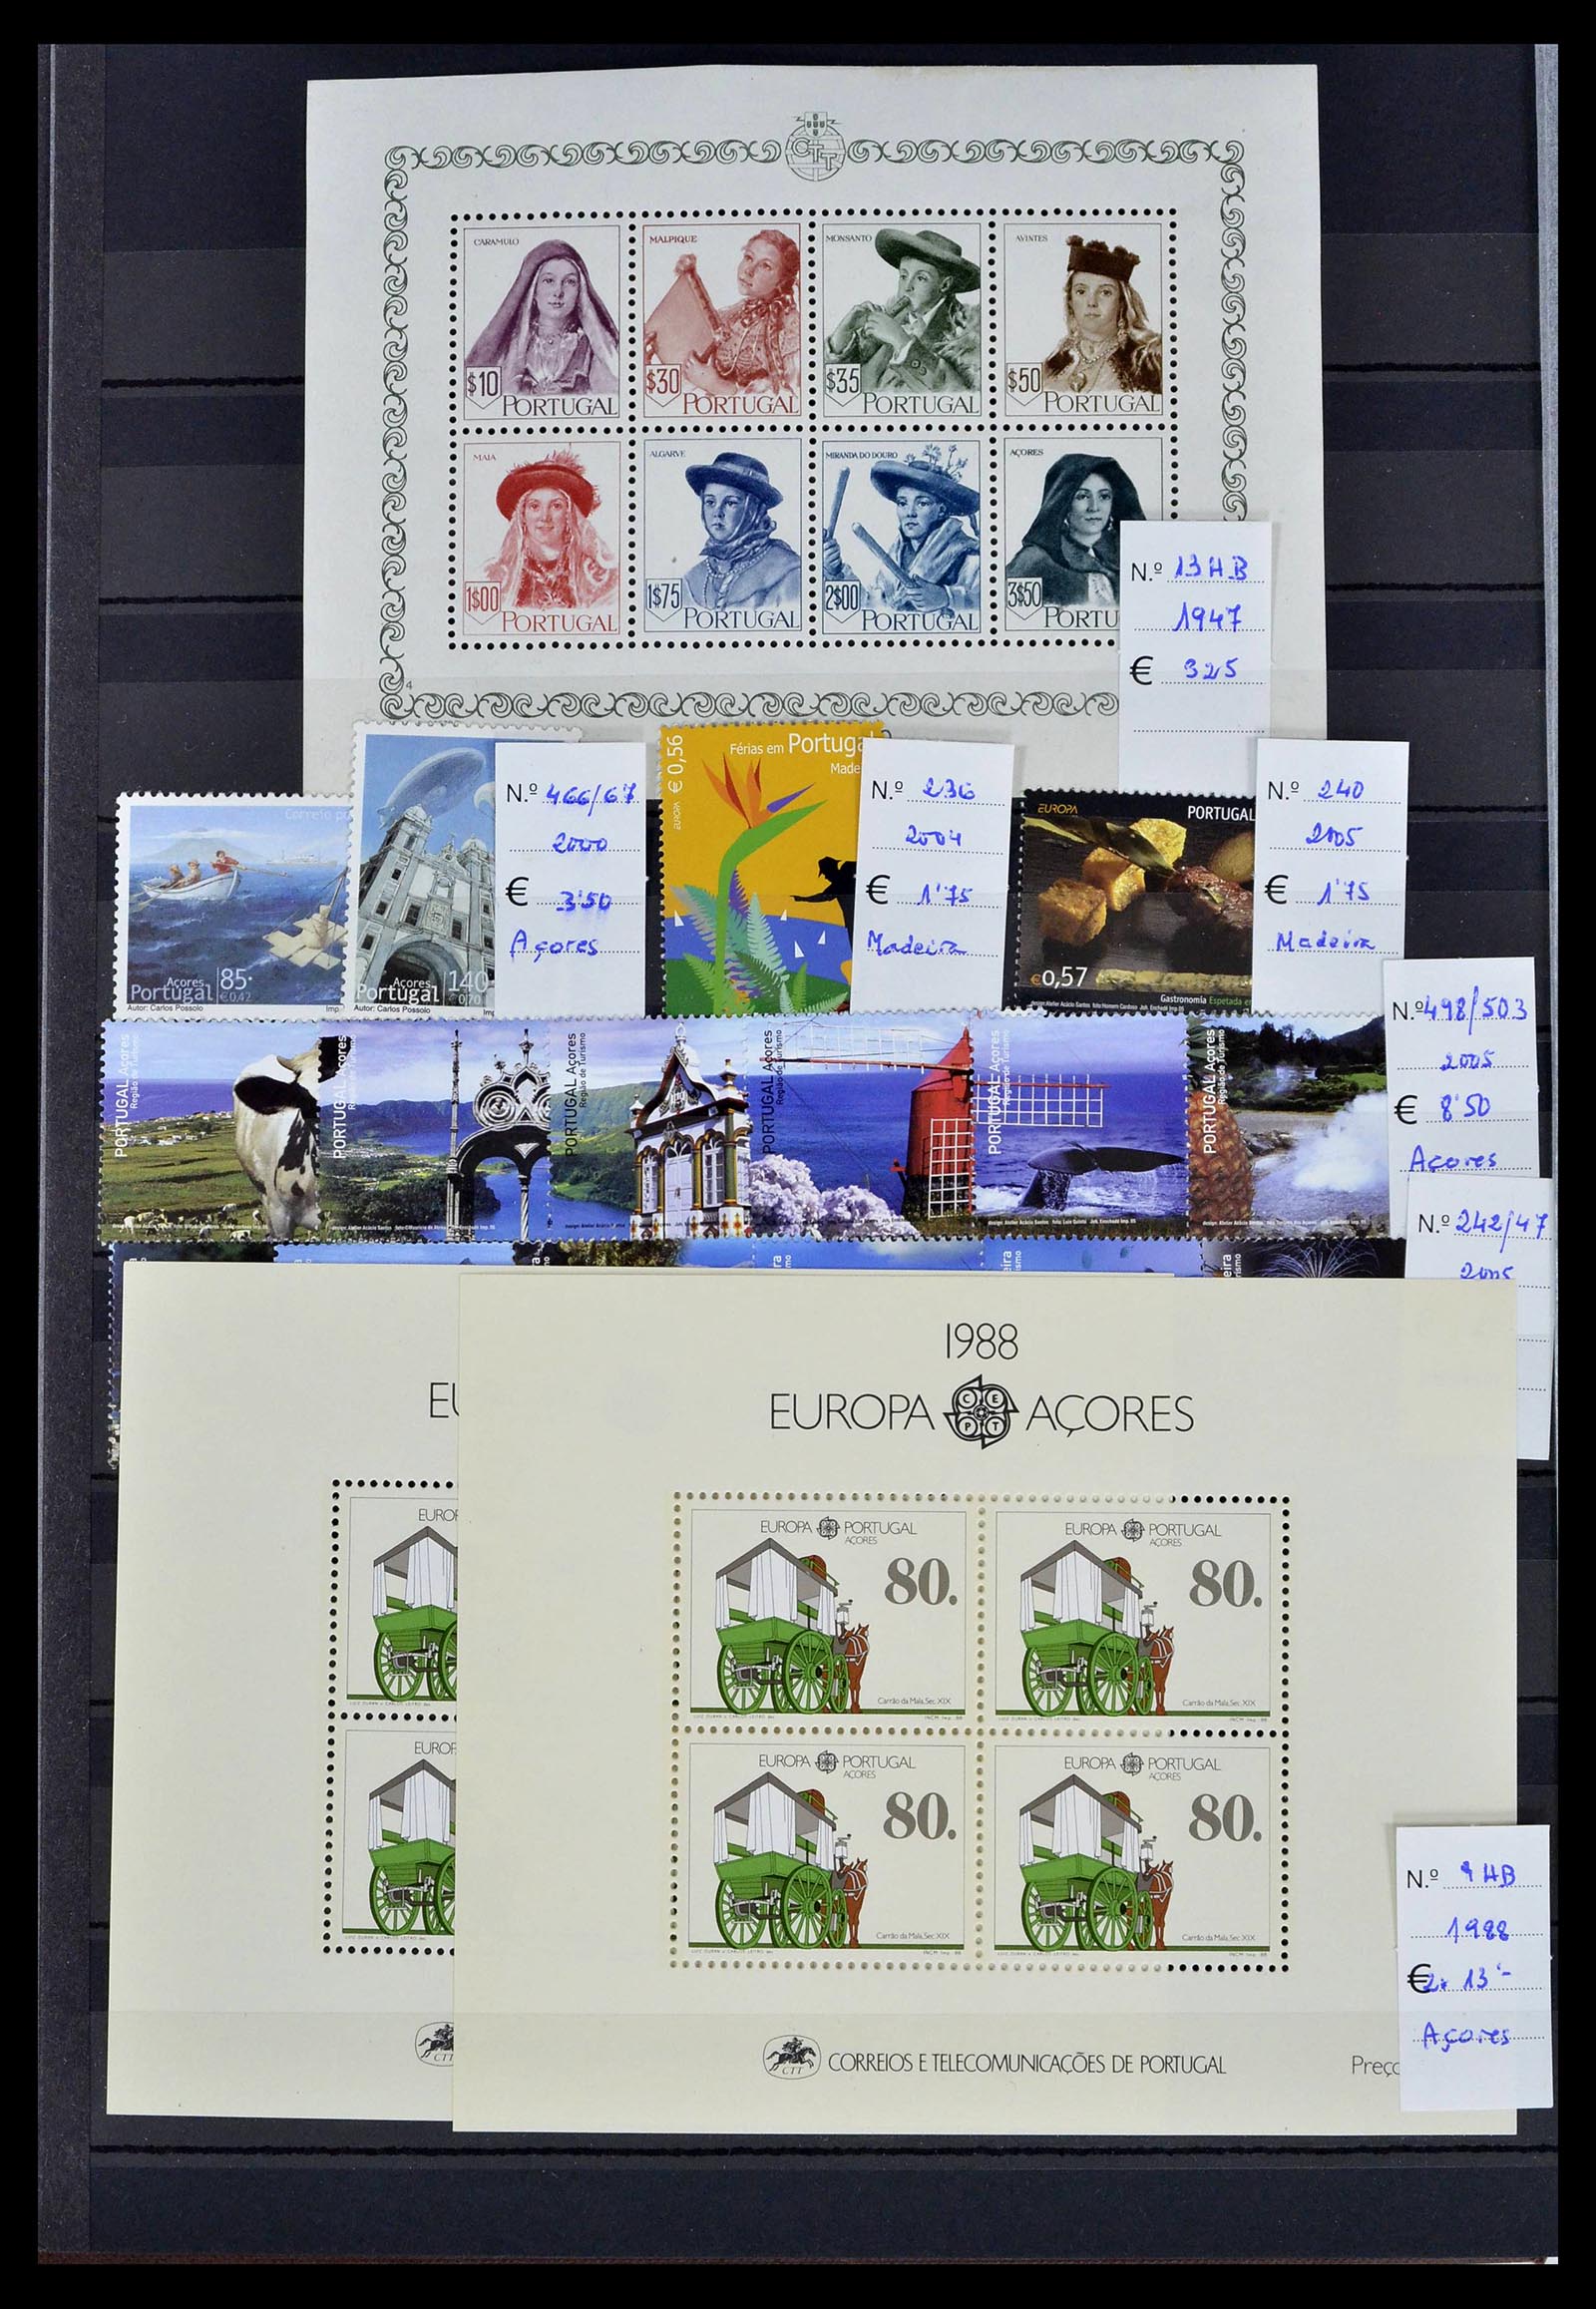 39236 0013 - Stamp collection 39236 European countries 40s-60s.